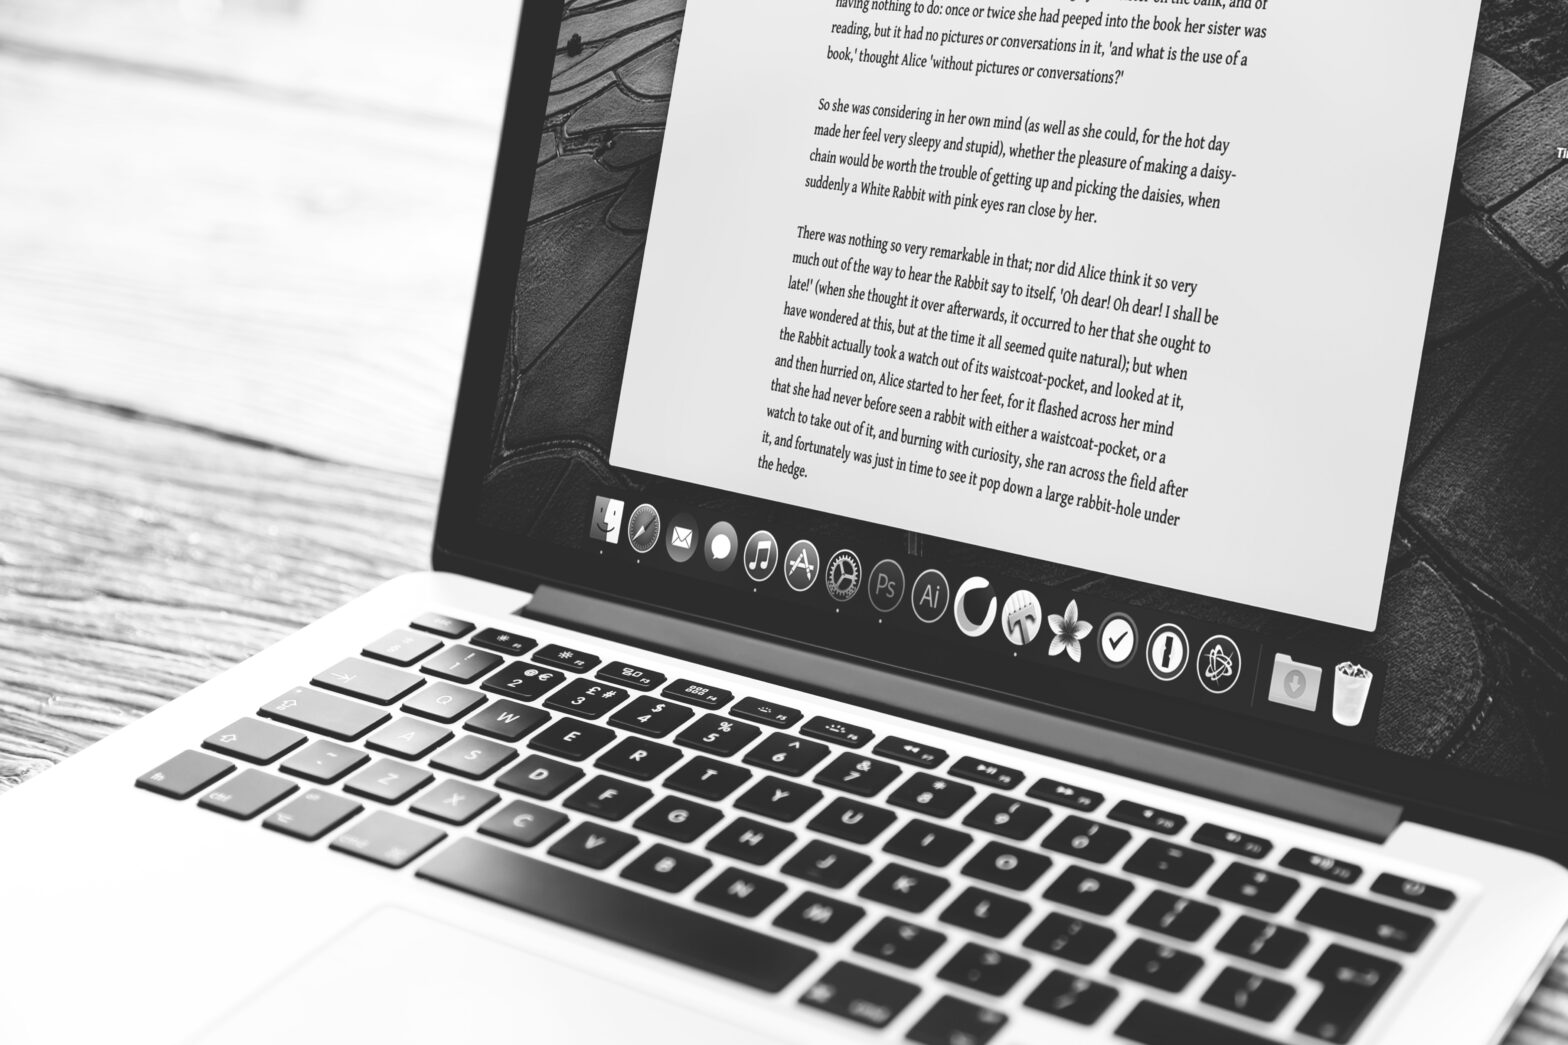 B&W Image of Laptop computer with a paper being written on its screen, thanks to Dan Counsell at Unsplash